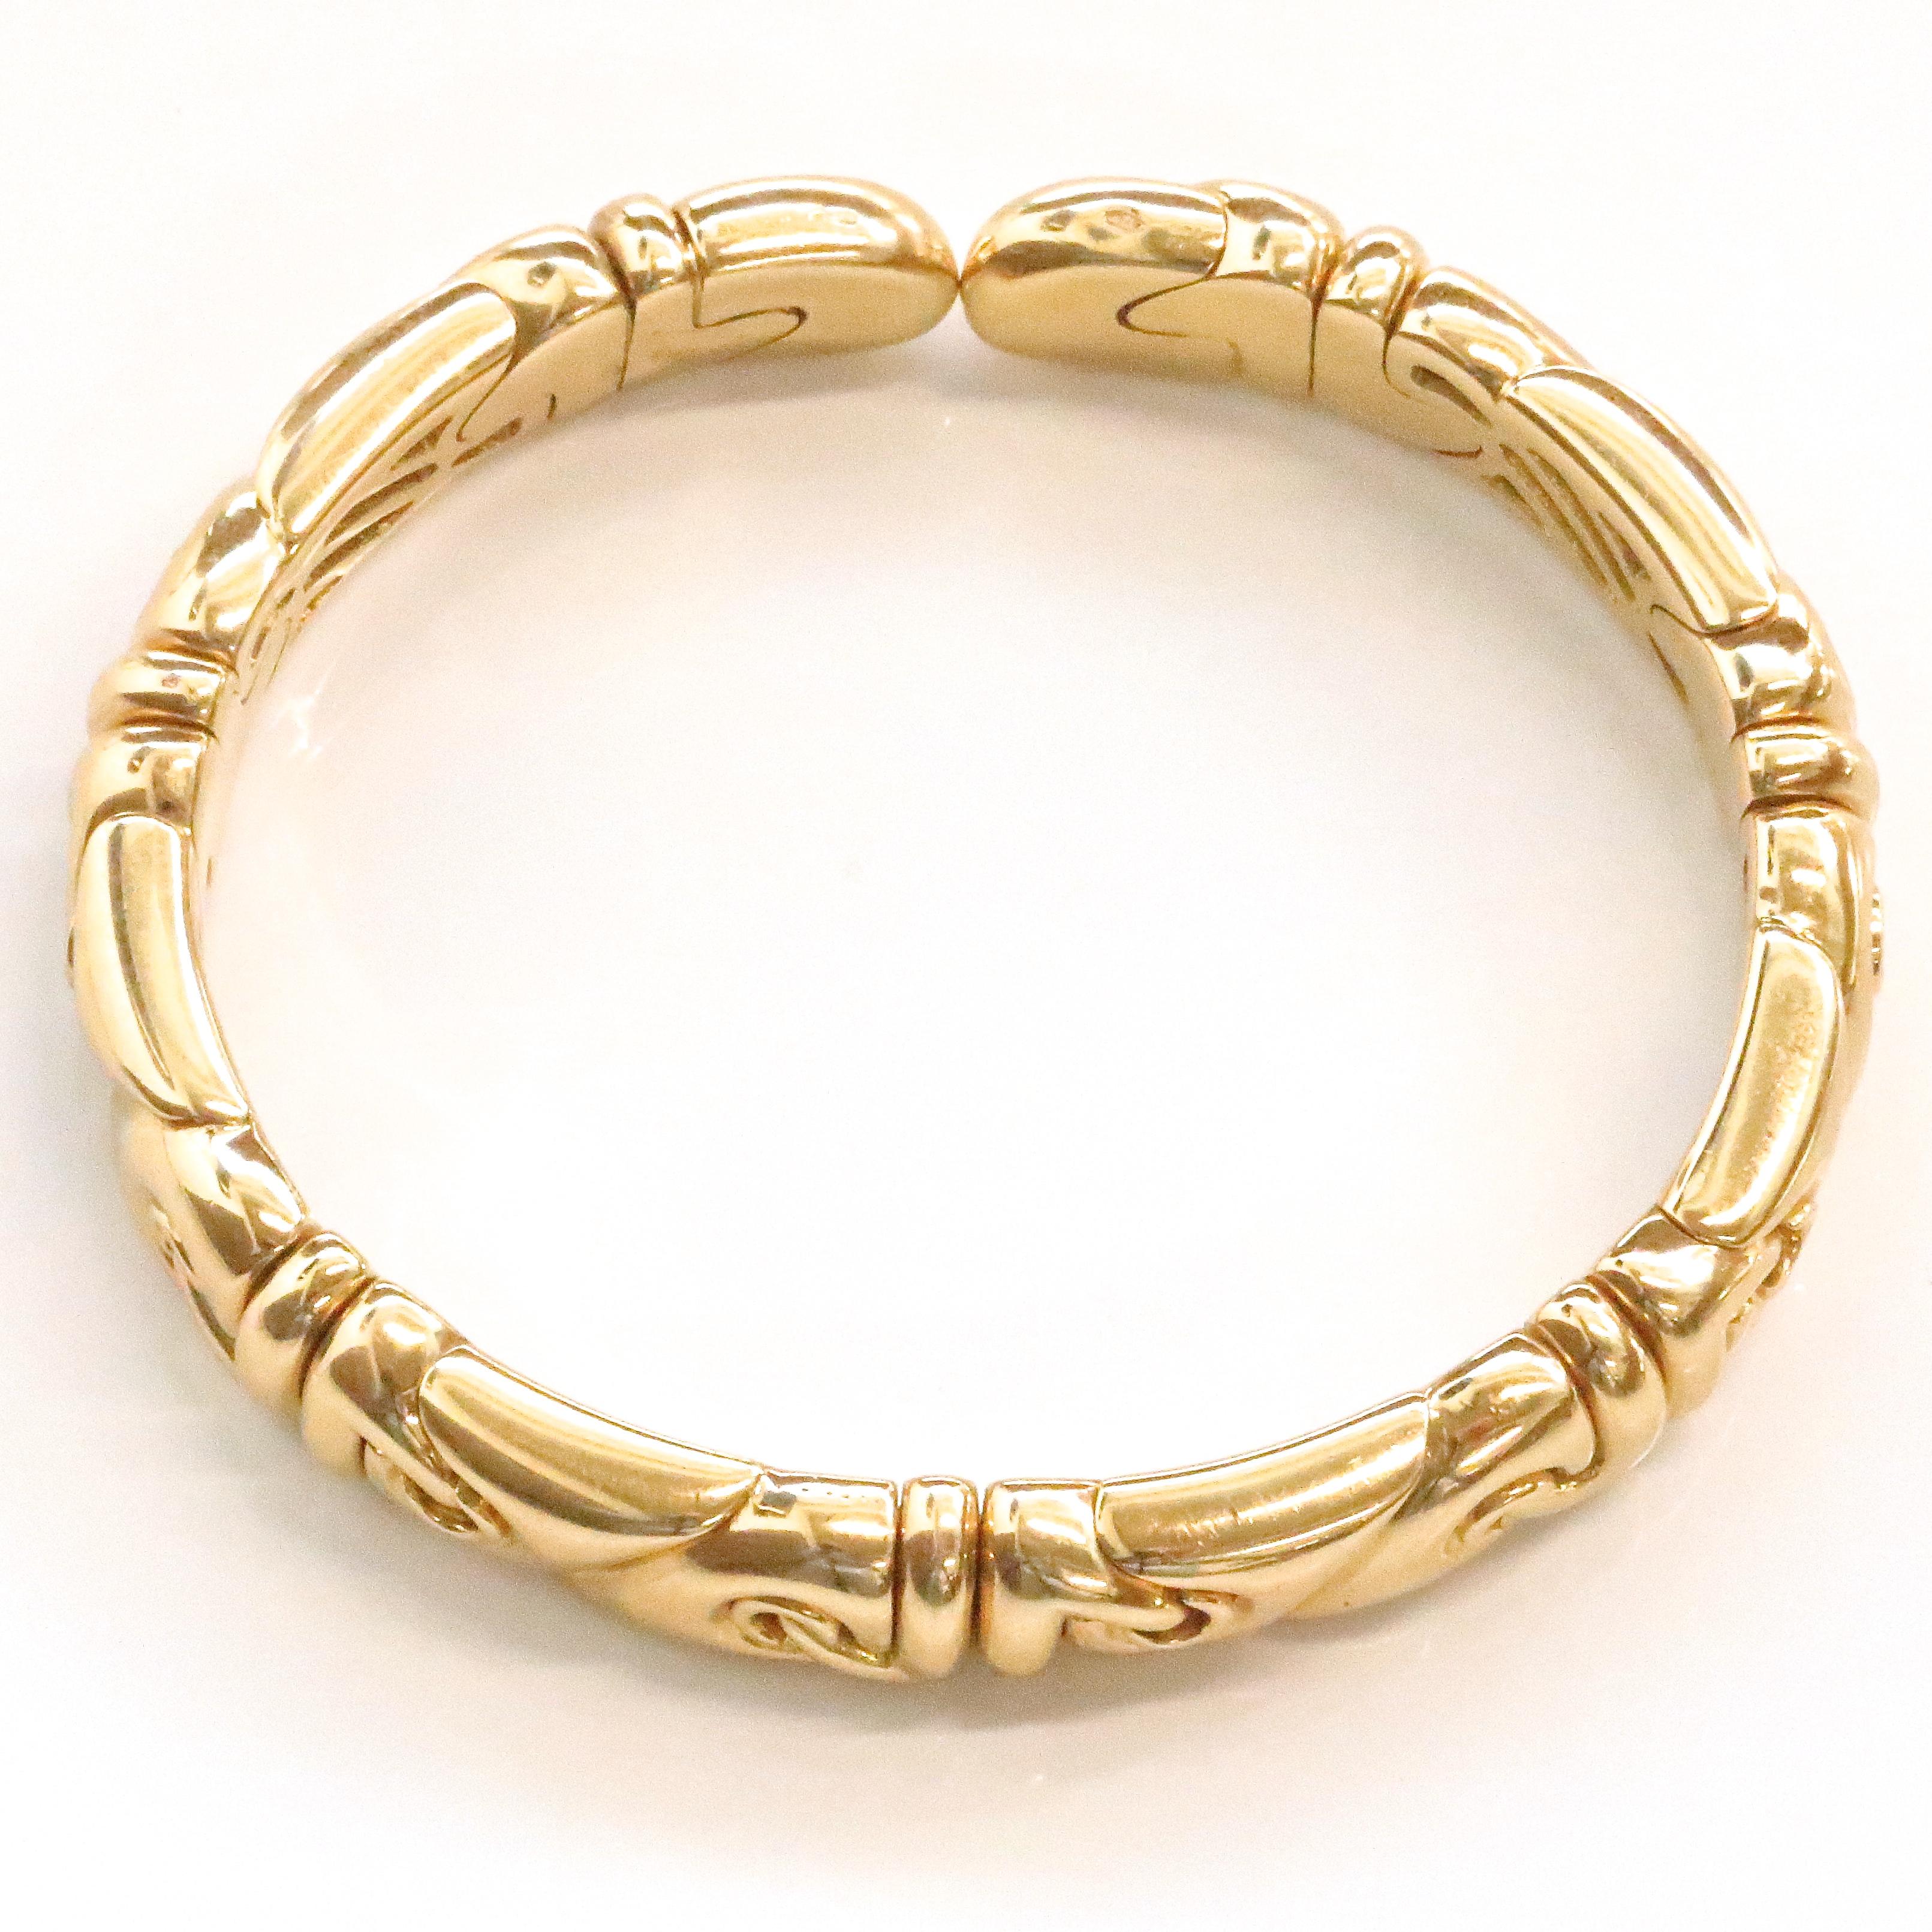 The iconic Bulgari Cuff bracelet is the perfect addition to your signed jewelry collection. You can't go wrong with classic yellow gold especially since solid gold pieces have been a hot trend lately. Vintage Bulgari 18k Gold Cuff Bangle. Signed